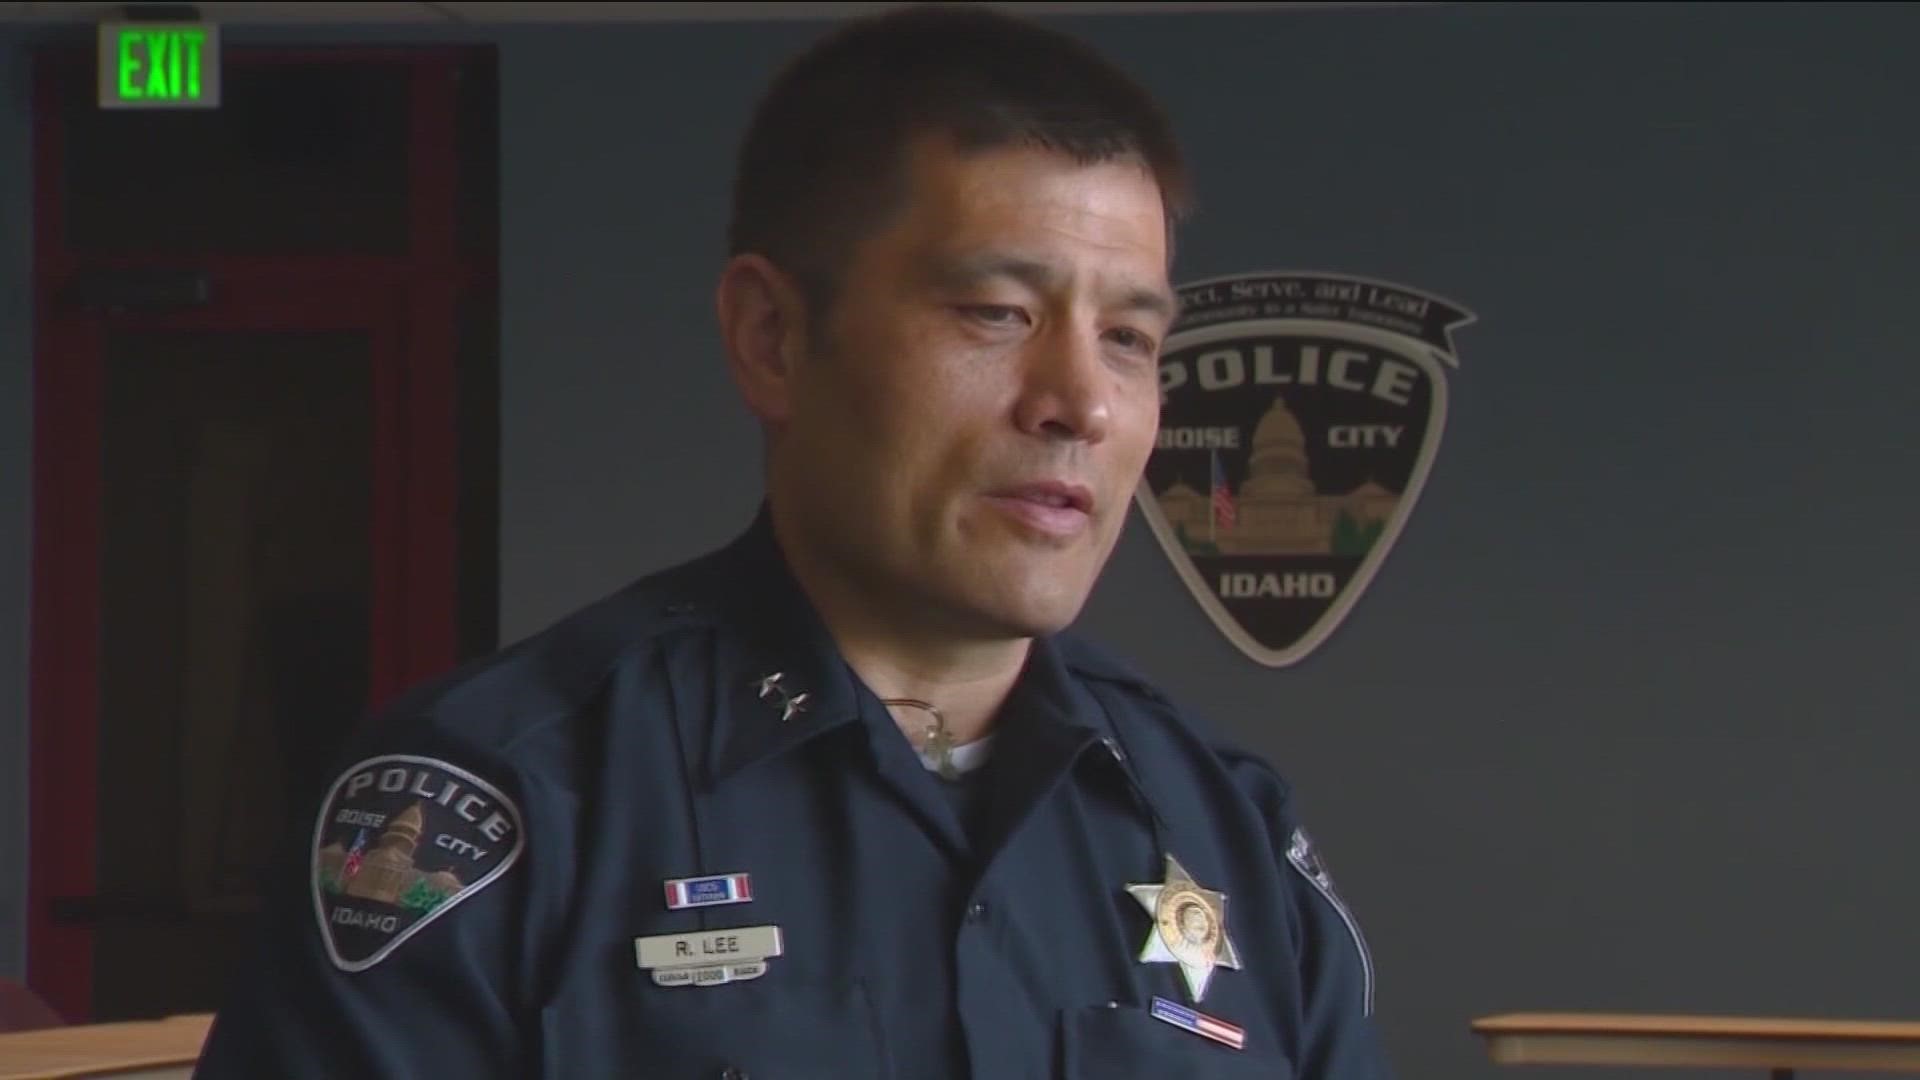 Nine officers filed complaints against the Boise police chief. It was recommended that the chief be placed on leave.